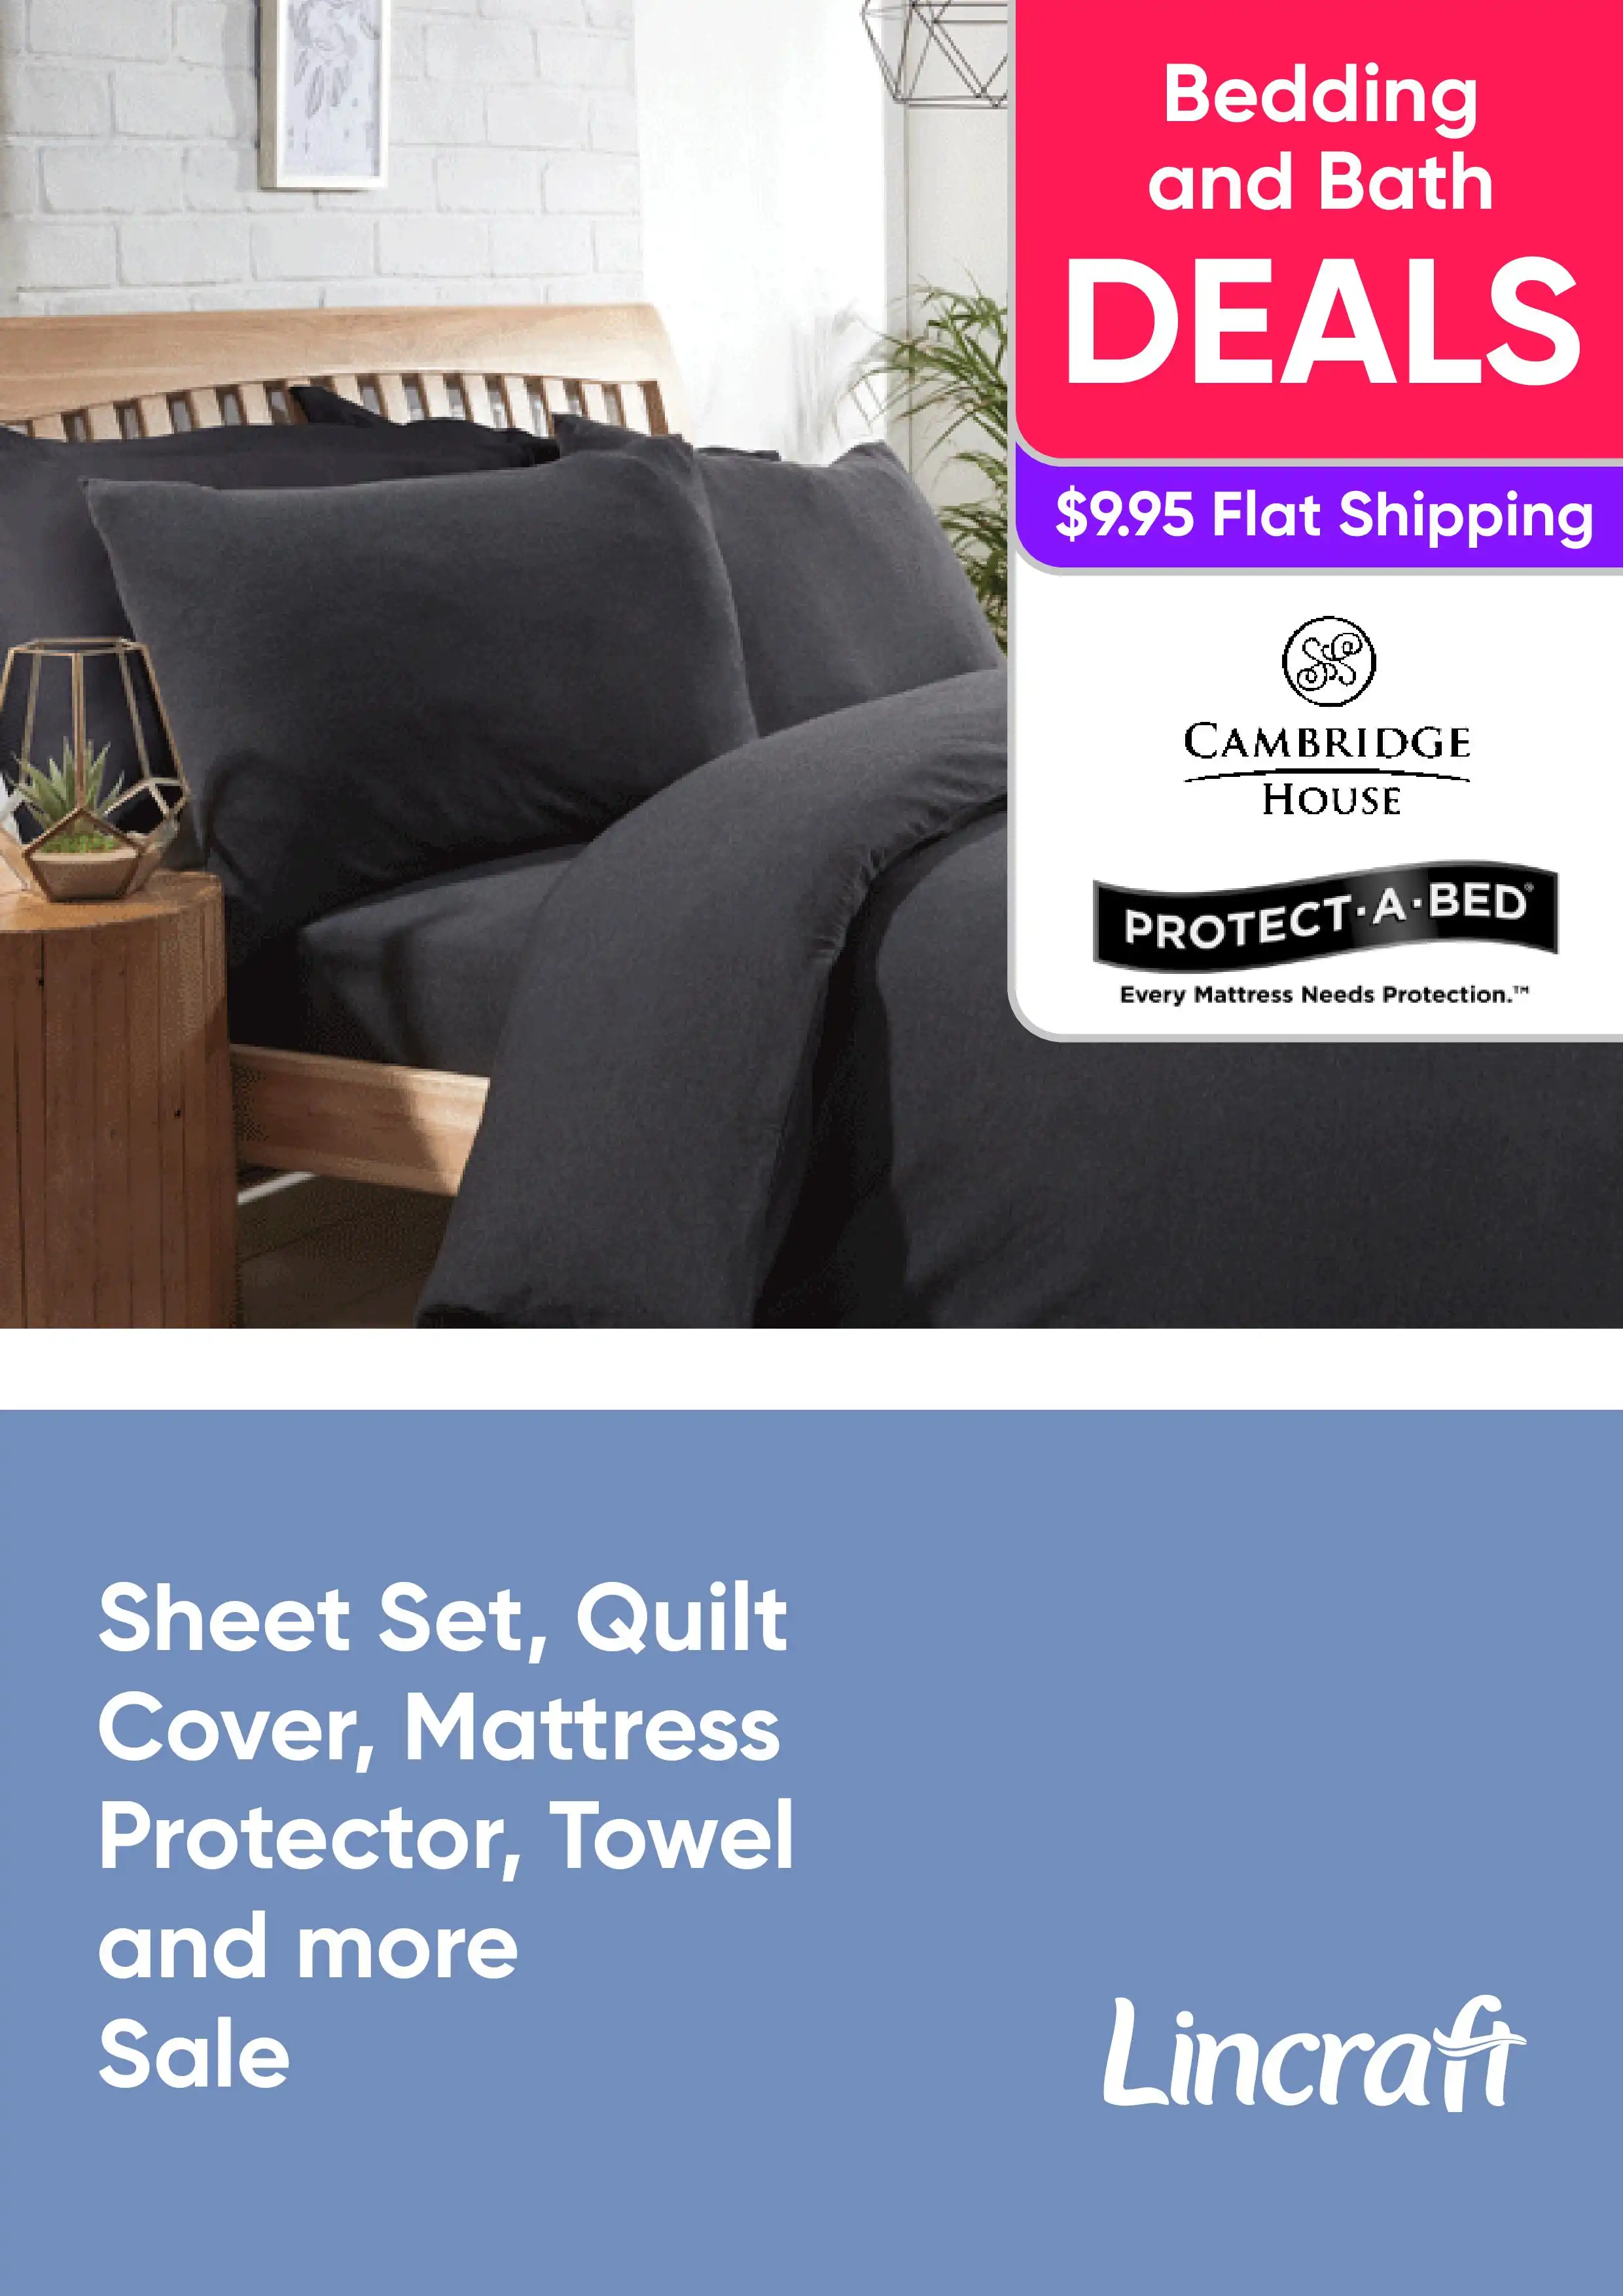 Bedding and Bath Sale - Sheet Sets, Quilt Covers, Mattress Protectors, Towels and More - Cambridge House, Protect-A-Bed